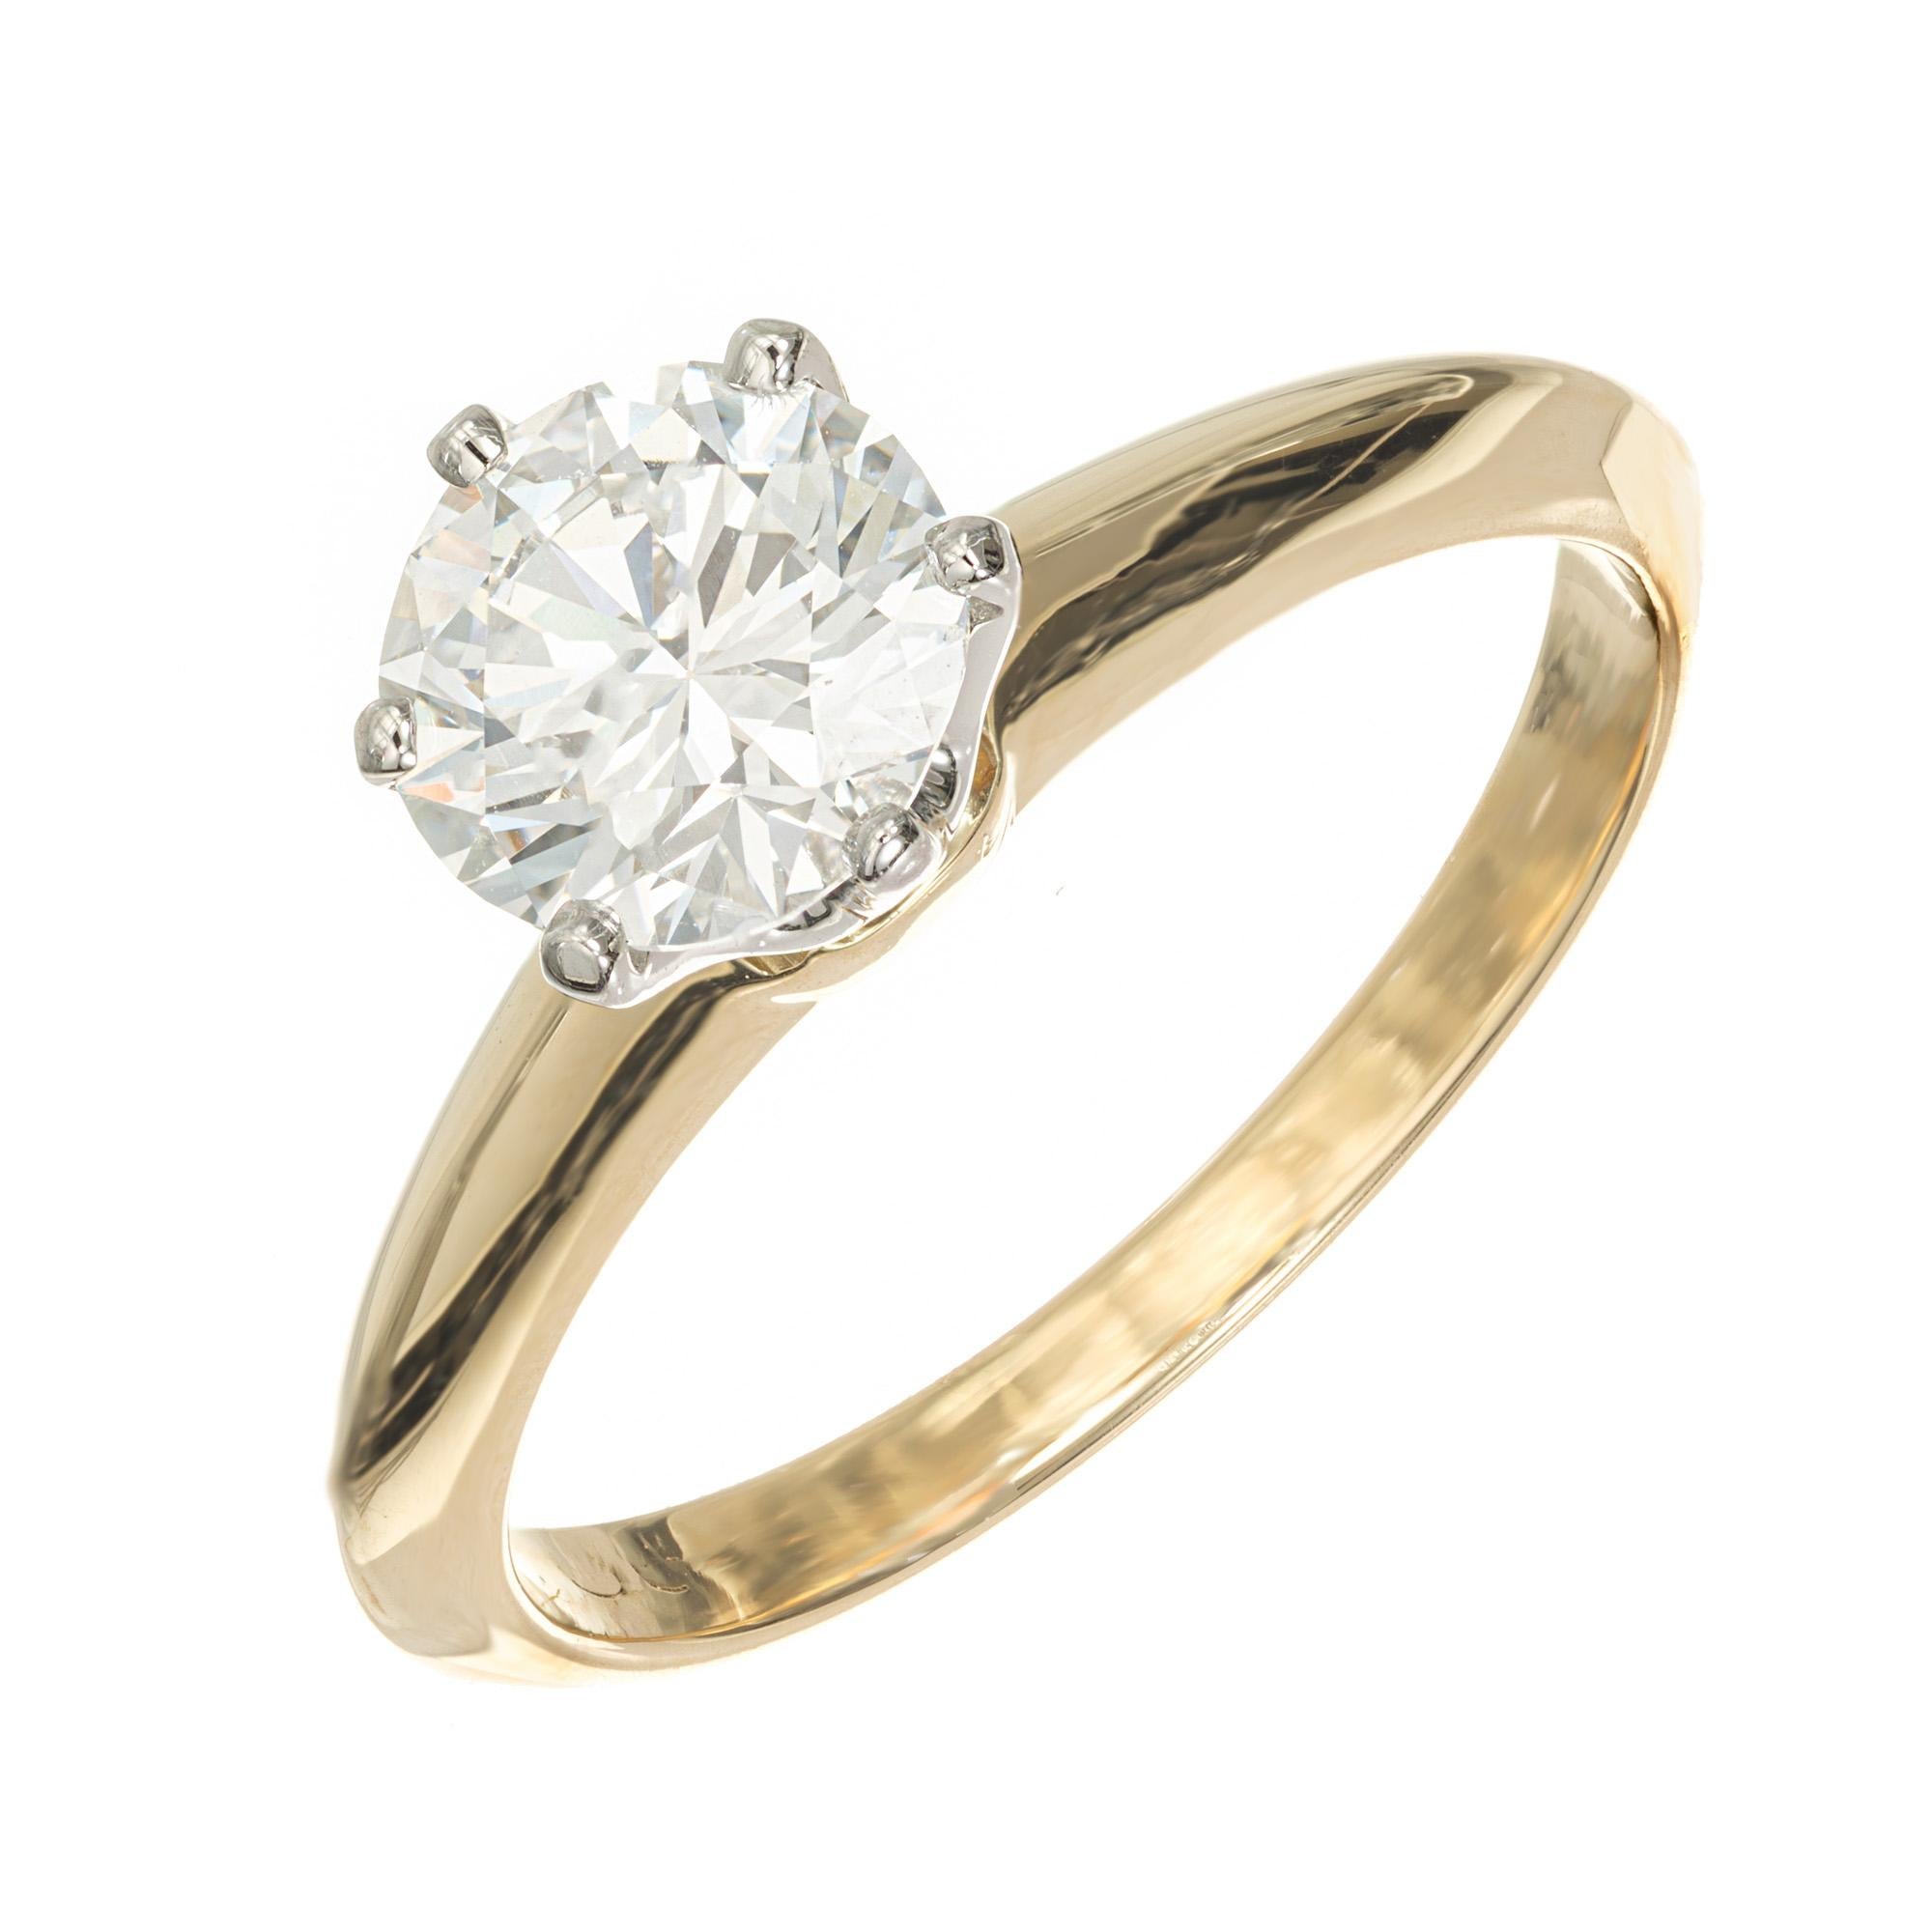 Vintage 1990's Tiffany & Co diamond solitaire engagement ring. GIA certified round brilliant center diamond in a platinum six prong crown on top of an 18k yellow gold setting. GIA certified as F (colorless) and VS2. In the 1990's time period,